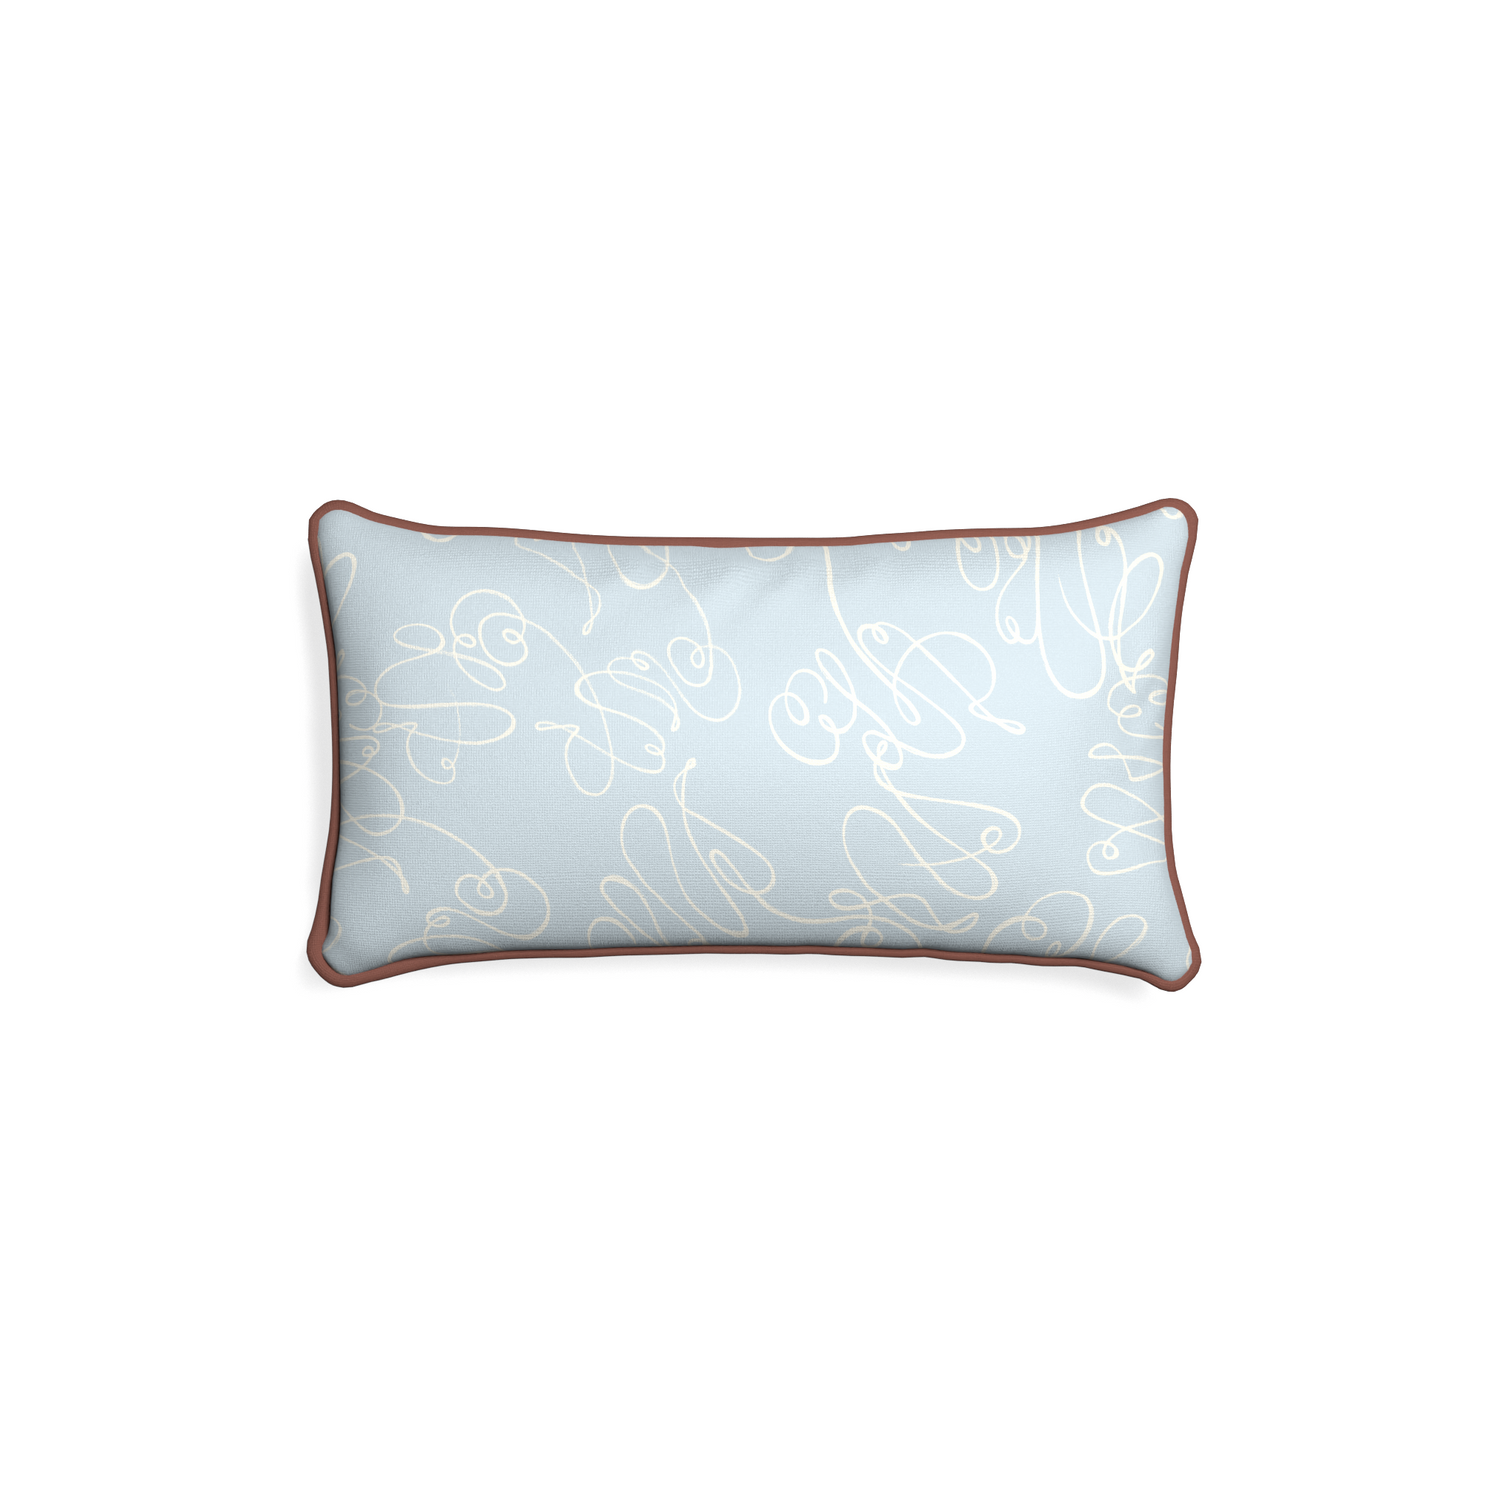 Petite-lumbar mirabella custom powder blue abstractpillow with w piping on white background